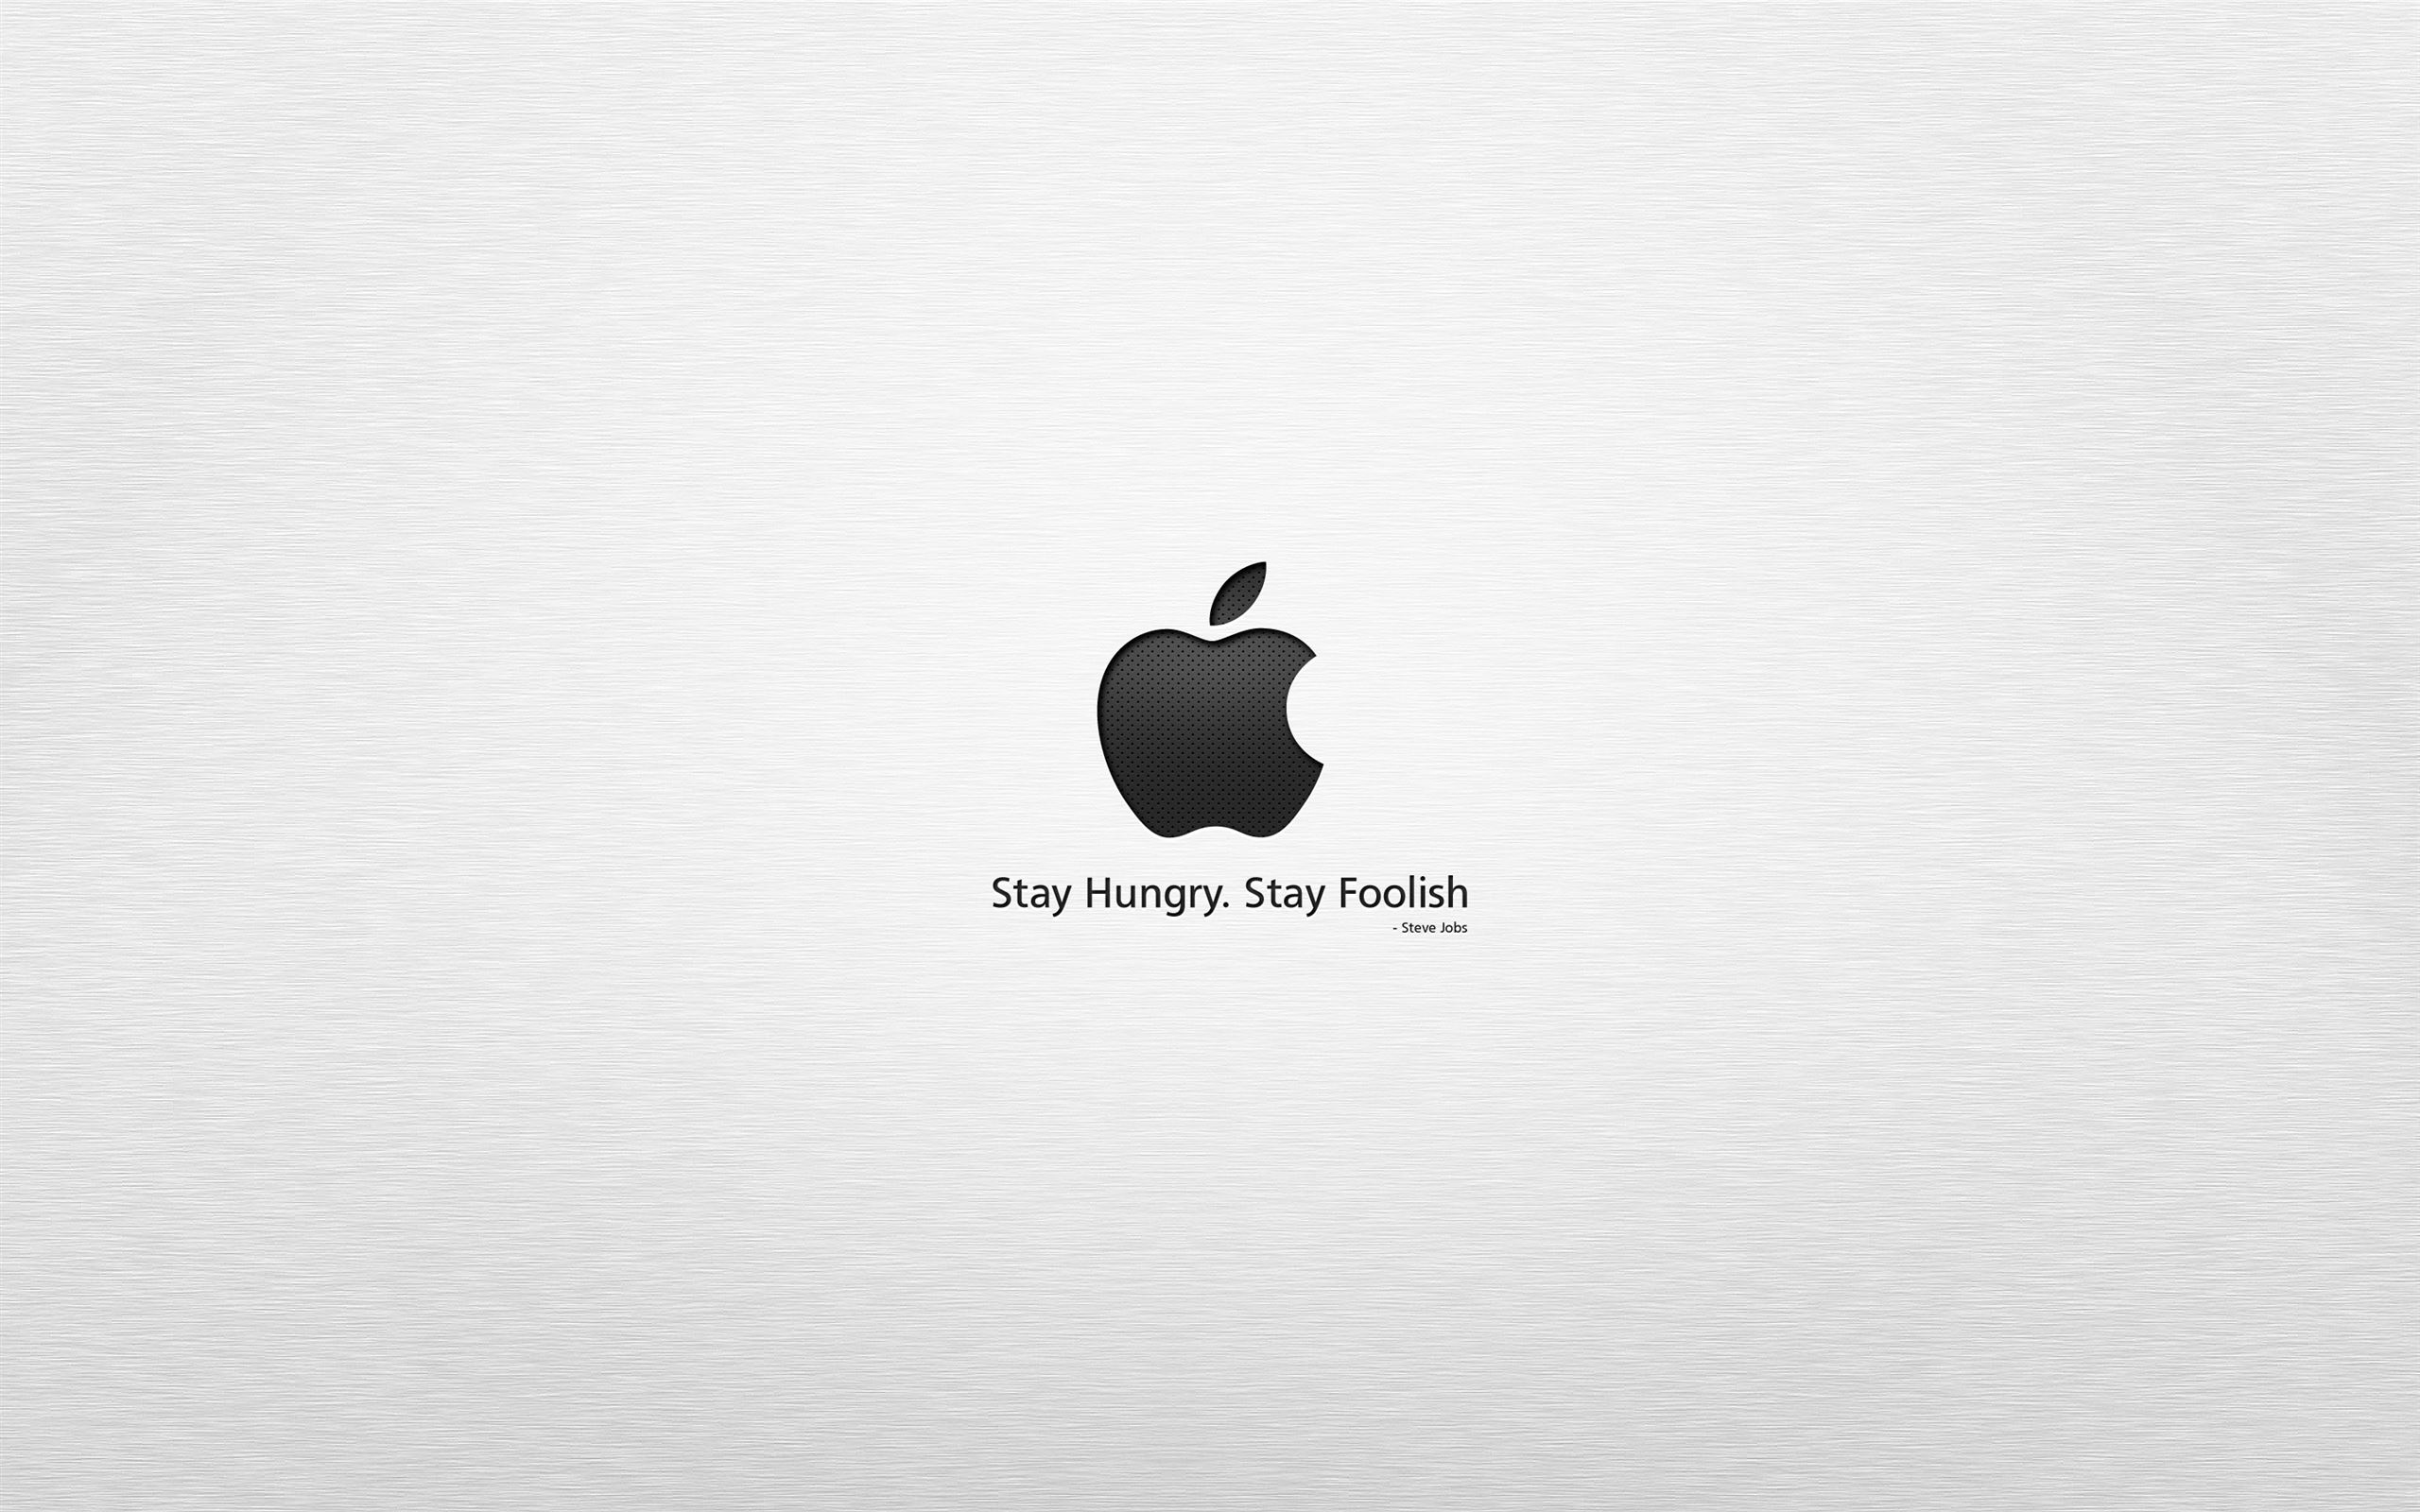 Stay Hungry Stay Foolish Macbook Air Wallpaper Download